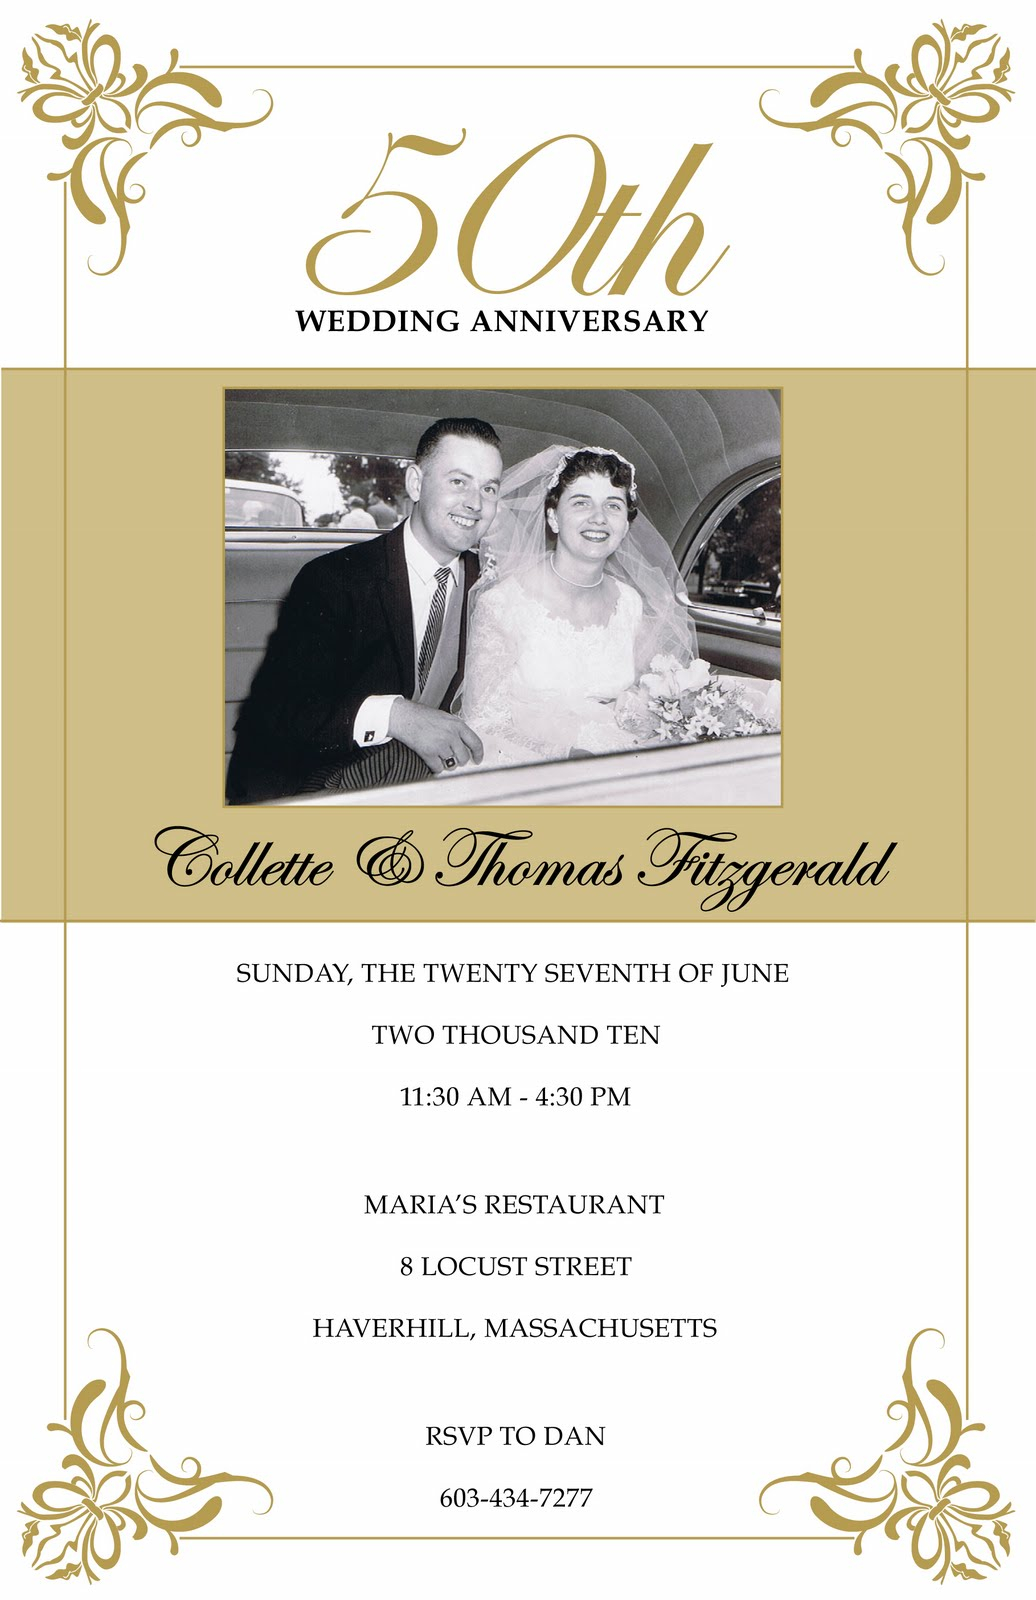 50th Wedding Anniversary Invitations Wedding Invitation Collection intended for measurements 1036 X 1600